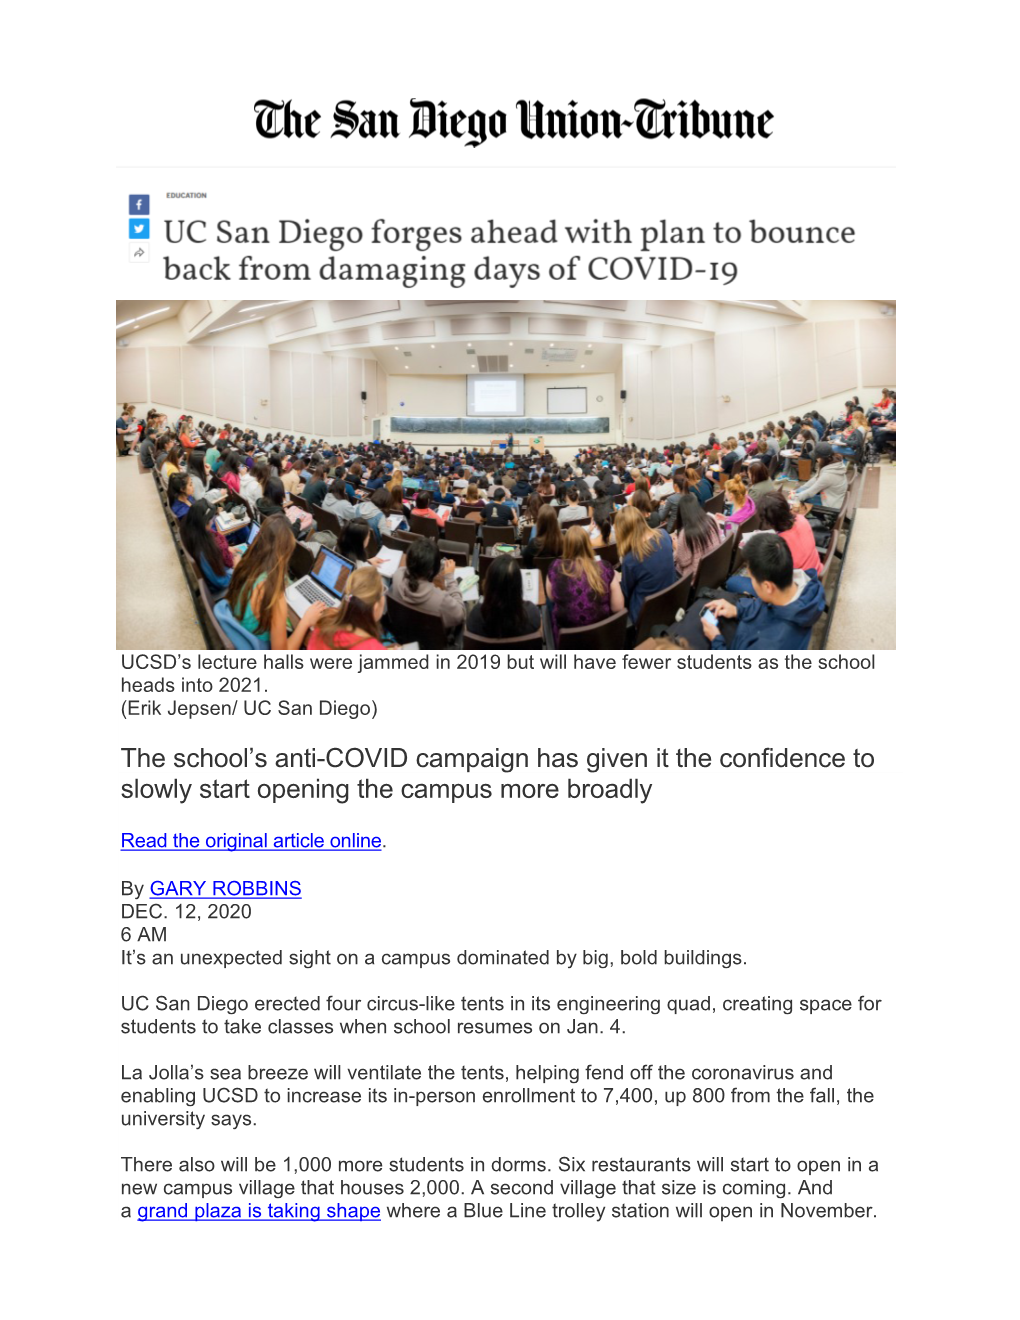 UC San Diego Forges Ahead with Plan to Bounce